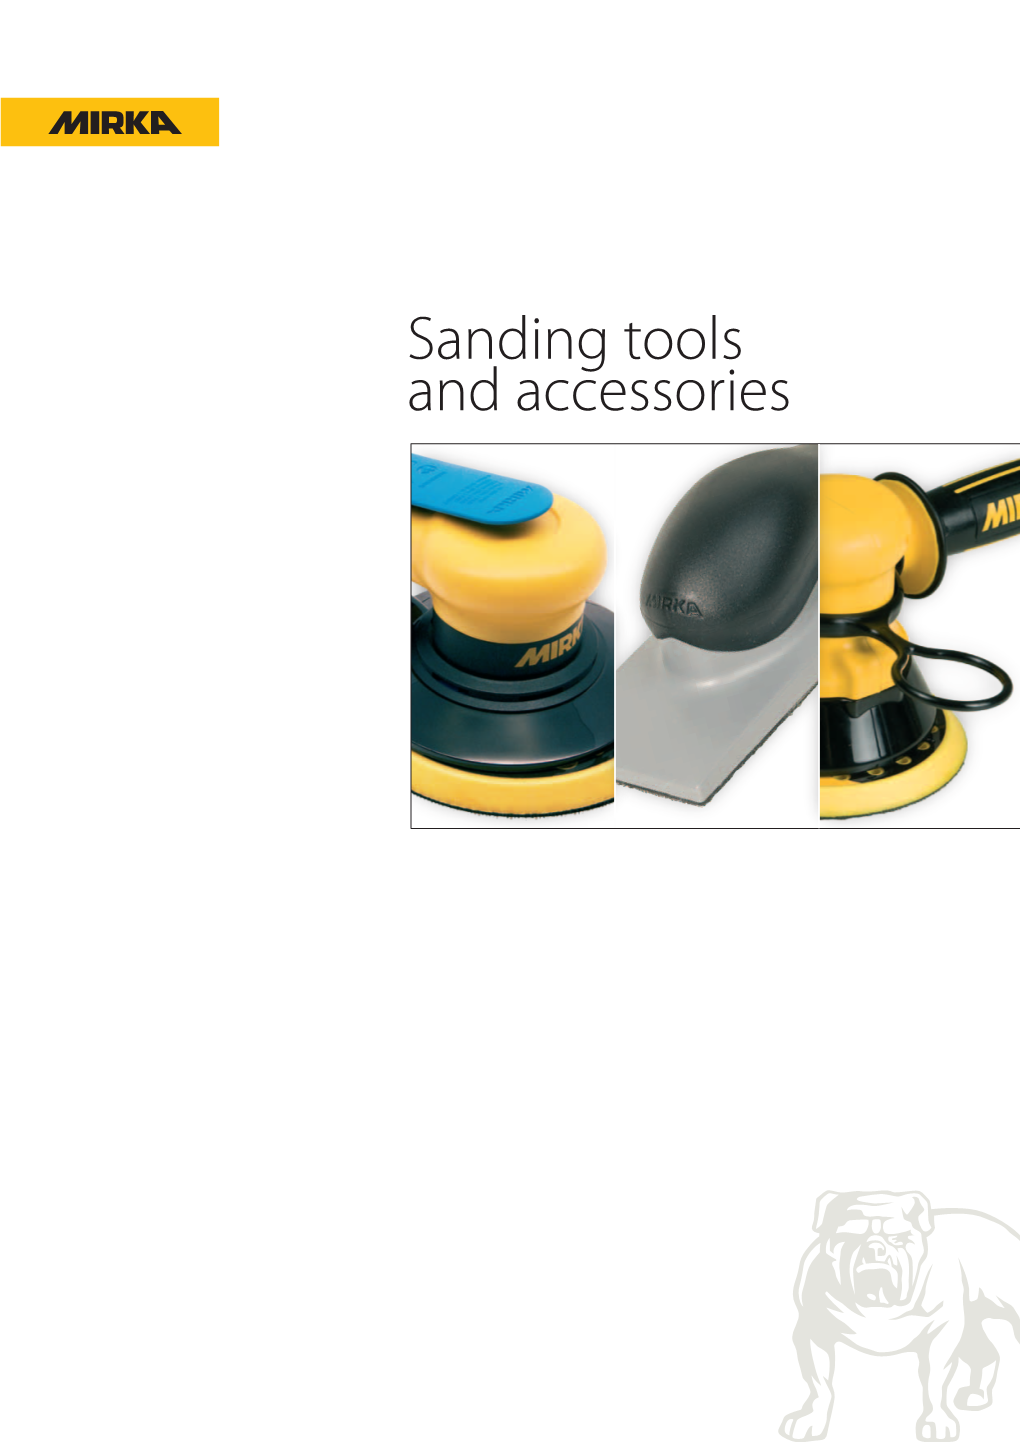 Sanding Tools and Accessories KWH Mirka Ltd Is Part of the KWH Group and the Biggest Manufacturer of Coated Abrasives in Scan- Dinavia